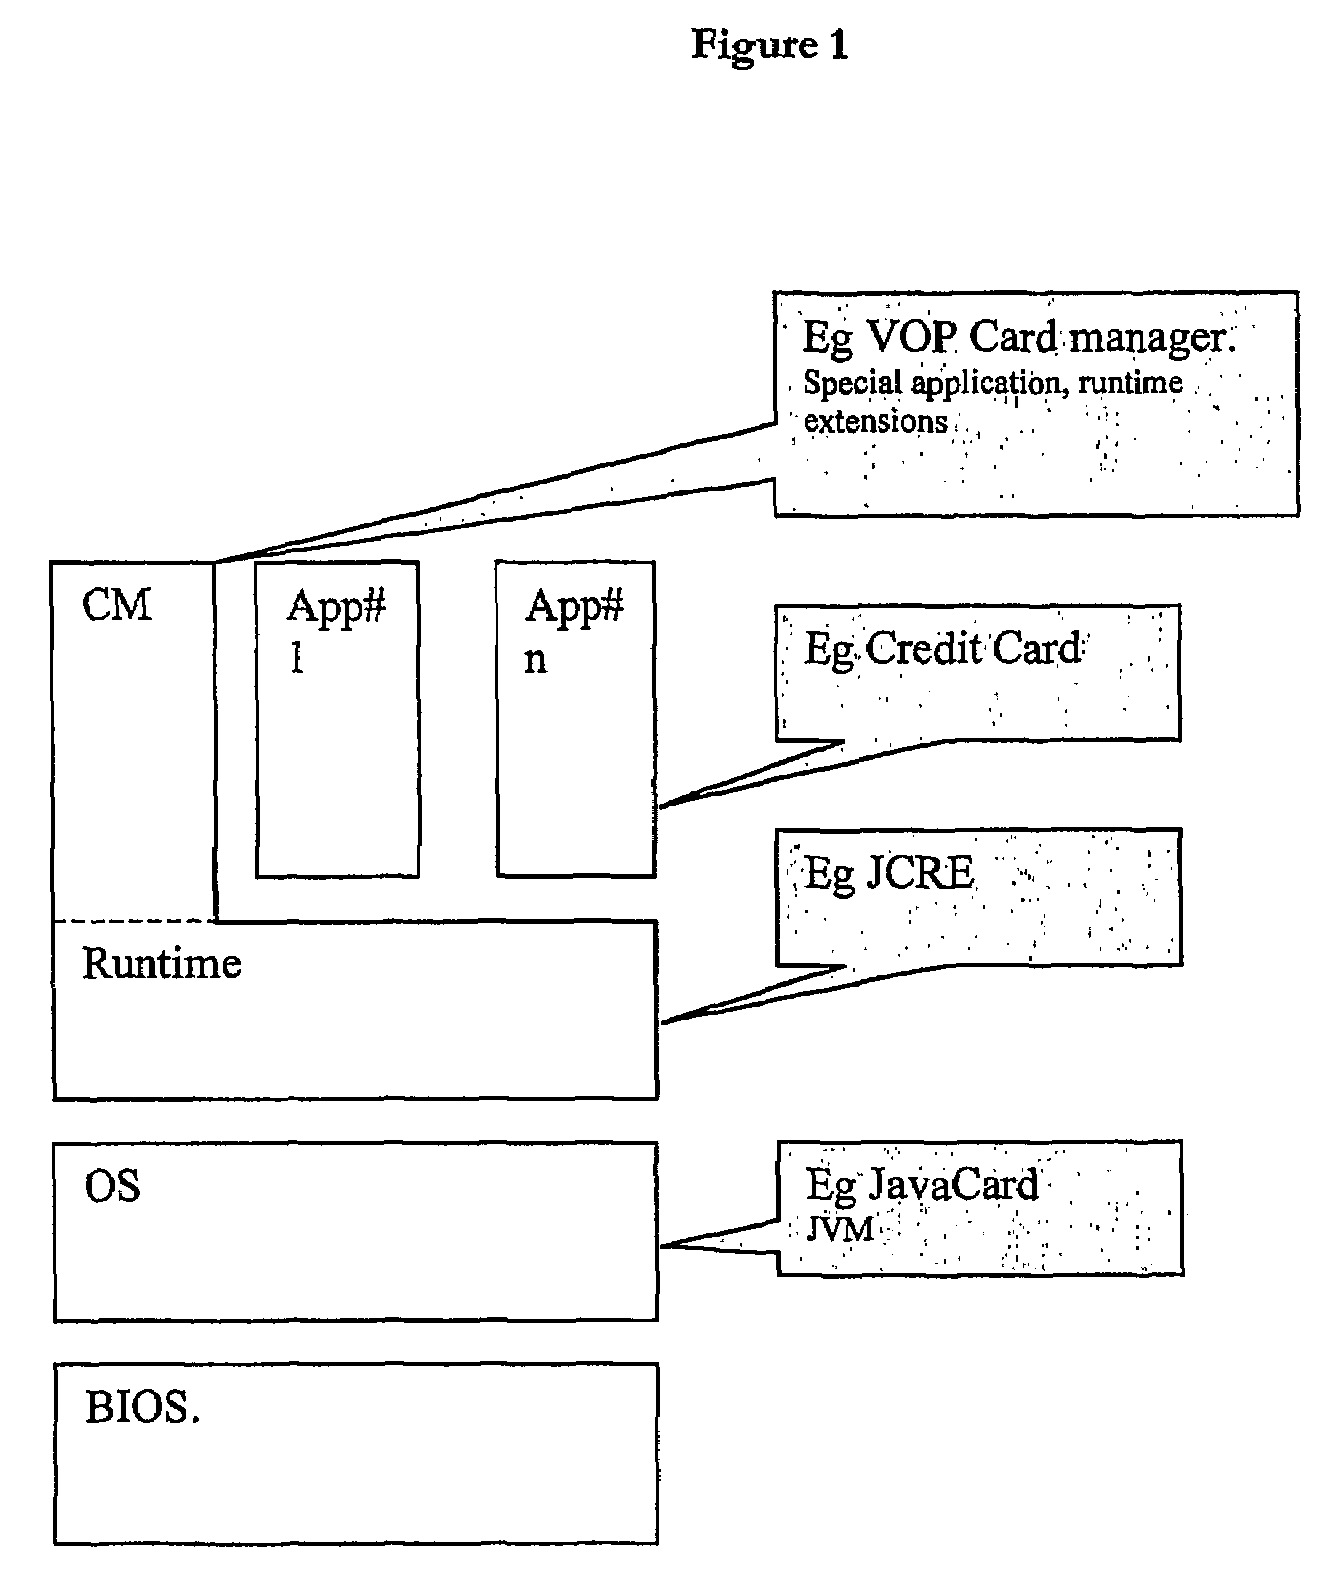 Computing device with an embedded microprocessor or micro-controller